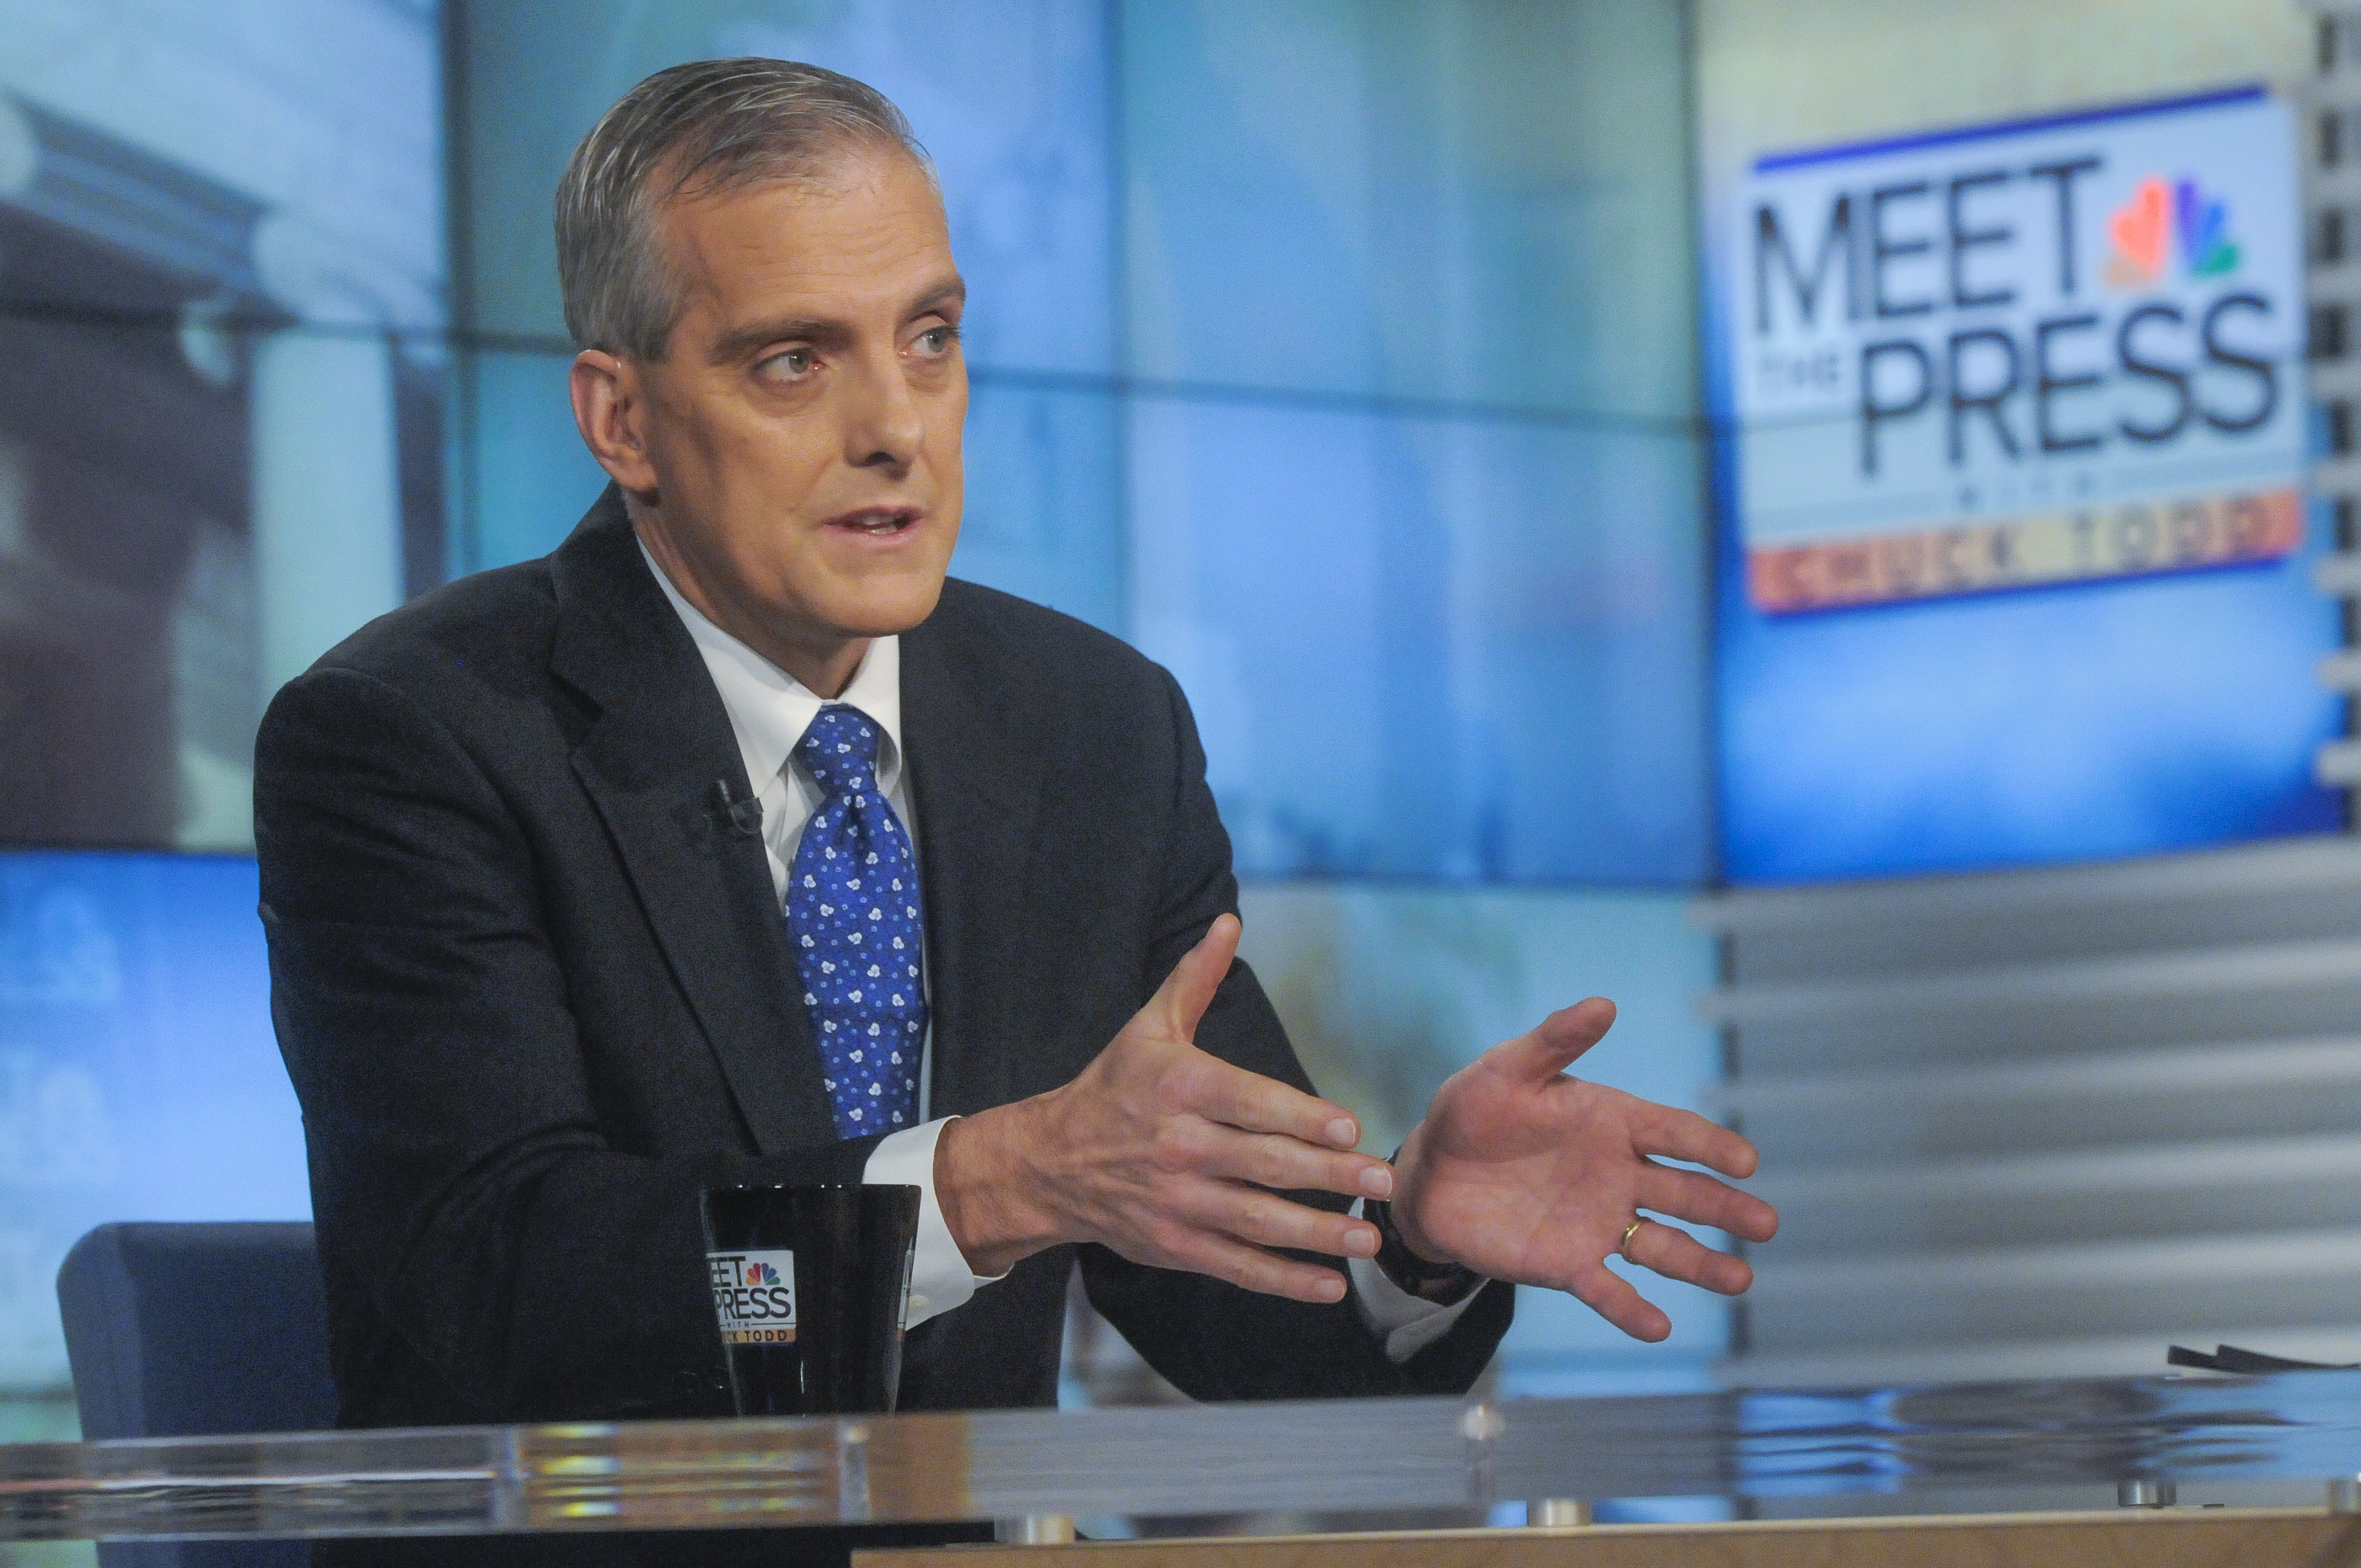 Denis McDonough White House Chief of Staff appears on "Meet the Press" in Washington D.C. on Jan. 25, 2015. (William B. Plowman—NBC/Getty Images)